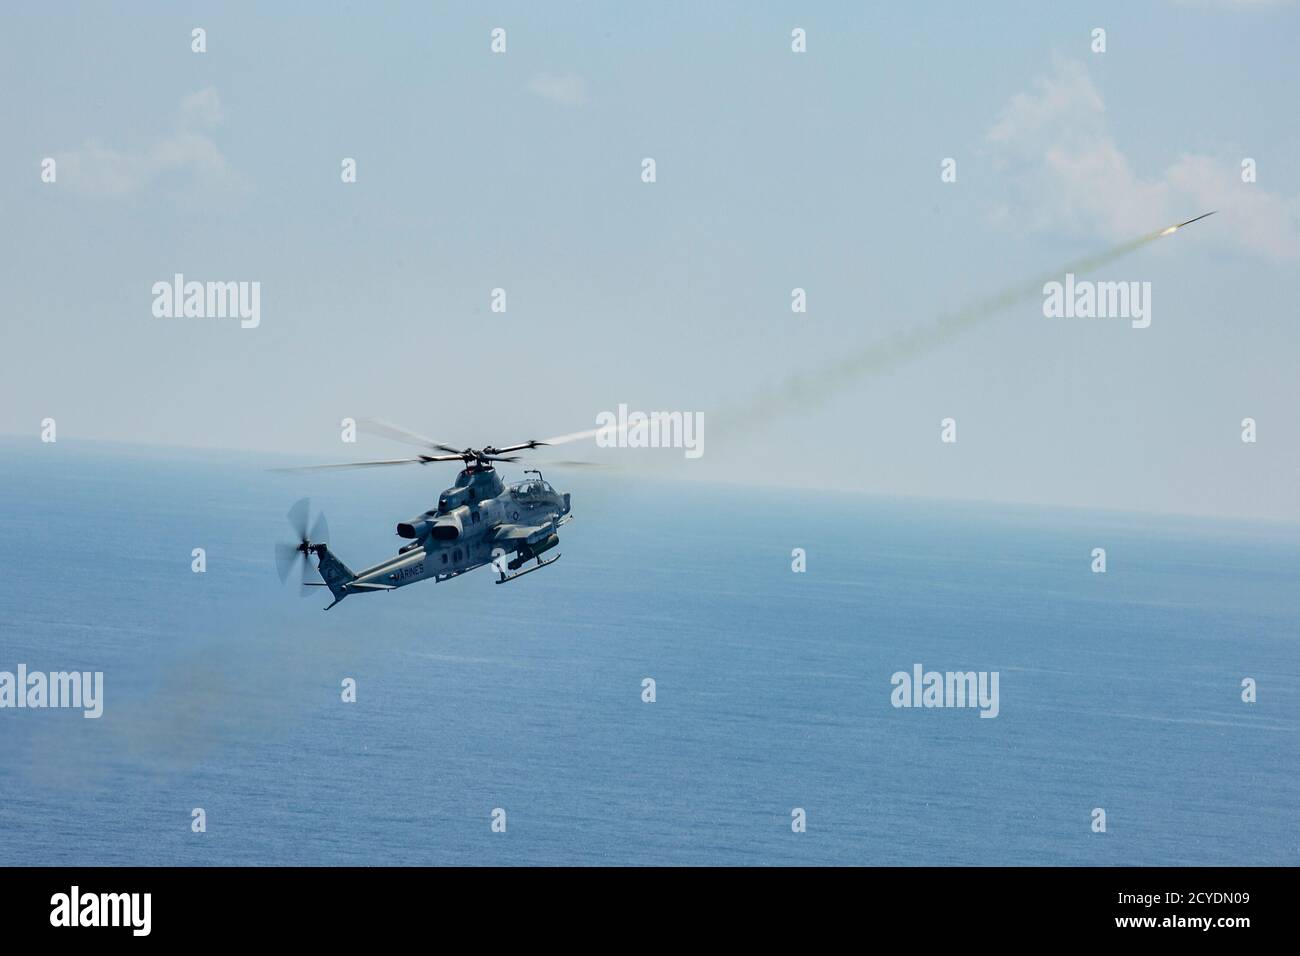 A U.S. Marine Corps AH-1Z Viper helicopter, with Marine Light Attack Helicopter Squadron (HMLA) 469, fires a training flare during a live-fire training event near Okinawa, Japan, Sept. 29, 2020. HMLA-469 conducted a live-fire exercise using Air Intercept Missiles (AIM-9 Sidewinder missiles) to improve proficiency with the weapon system. (U.S. Marine Corps photo by Cpl. Ethan M. LeBlanc) Stock Photo